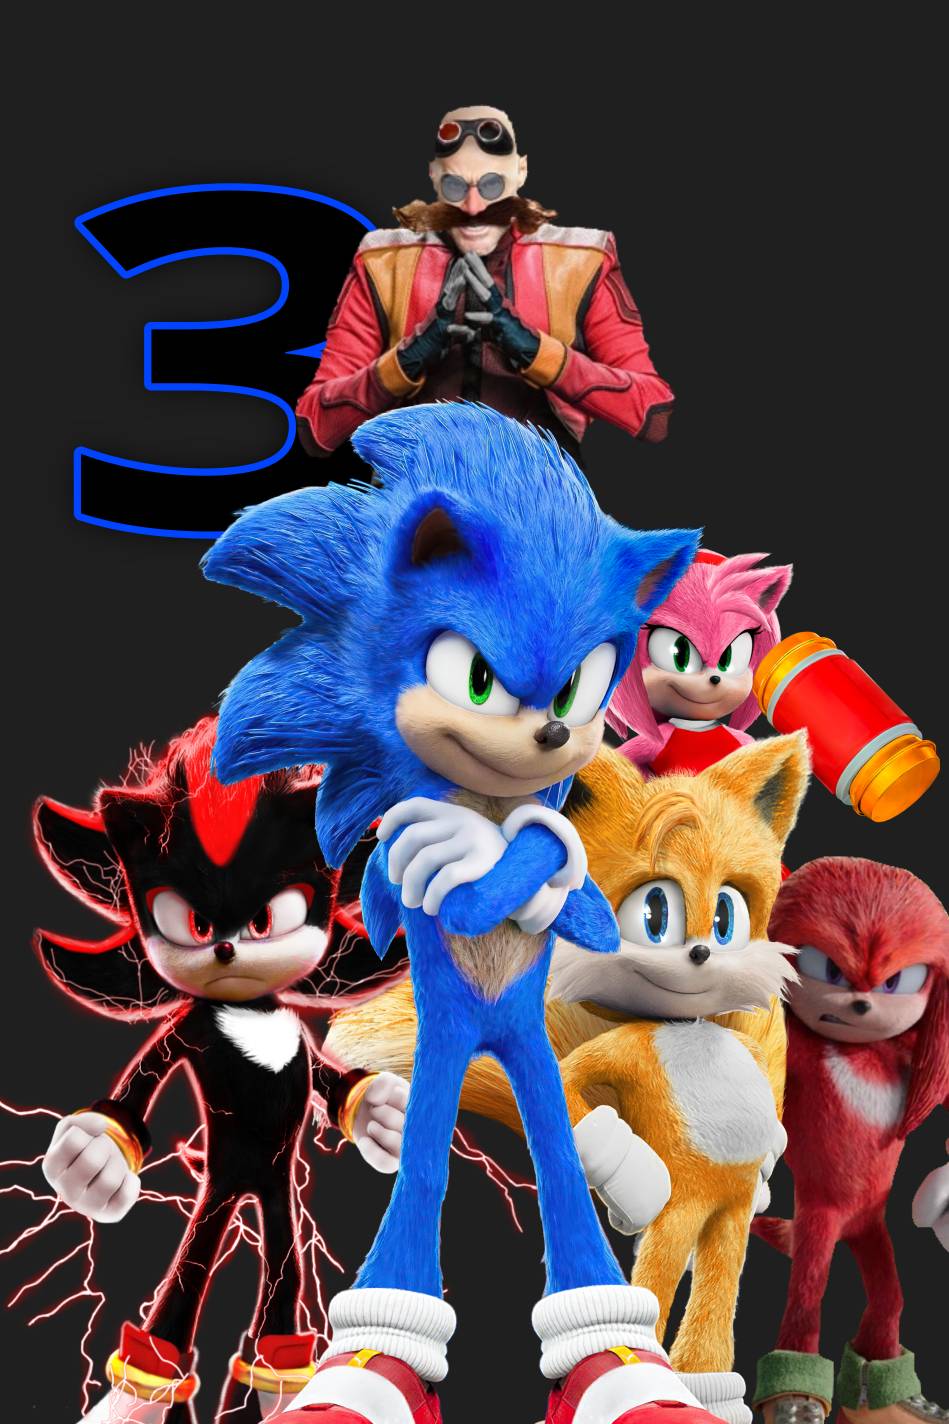 Sonic the hedgehog 3 poster by Sonicthehedgehog245 on DeviantArt